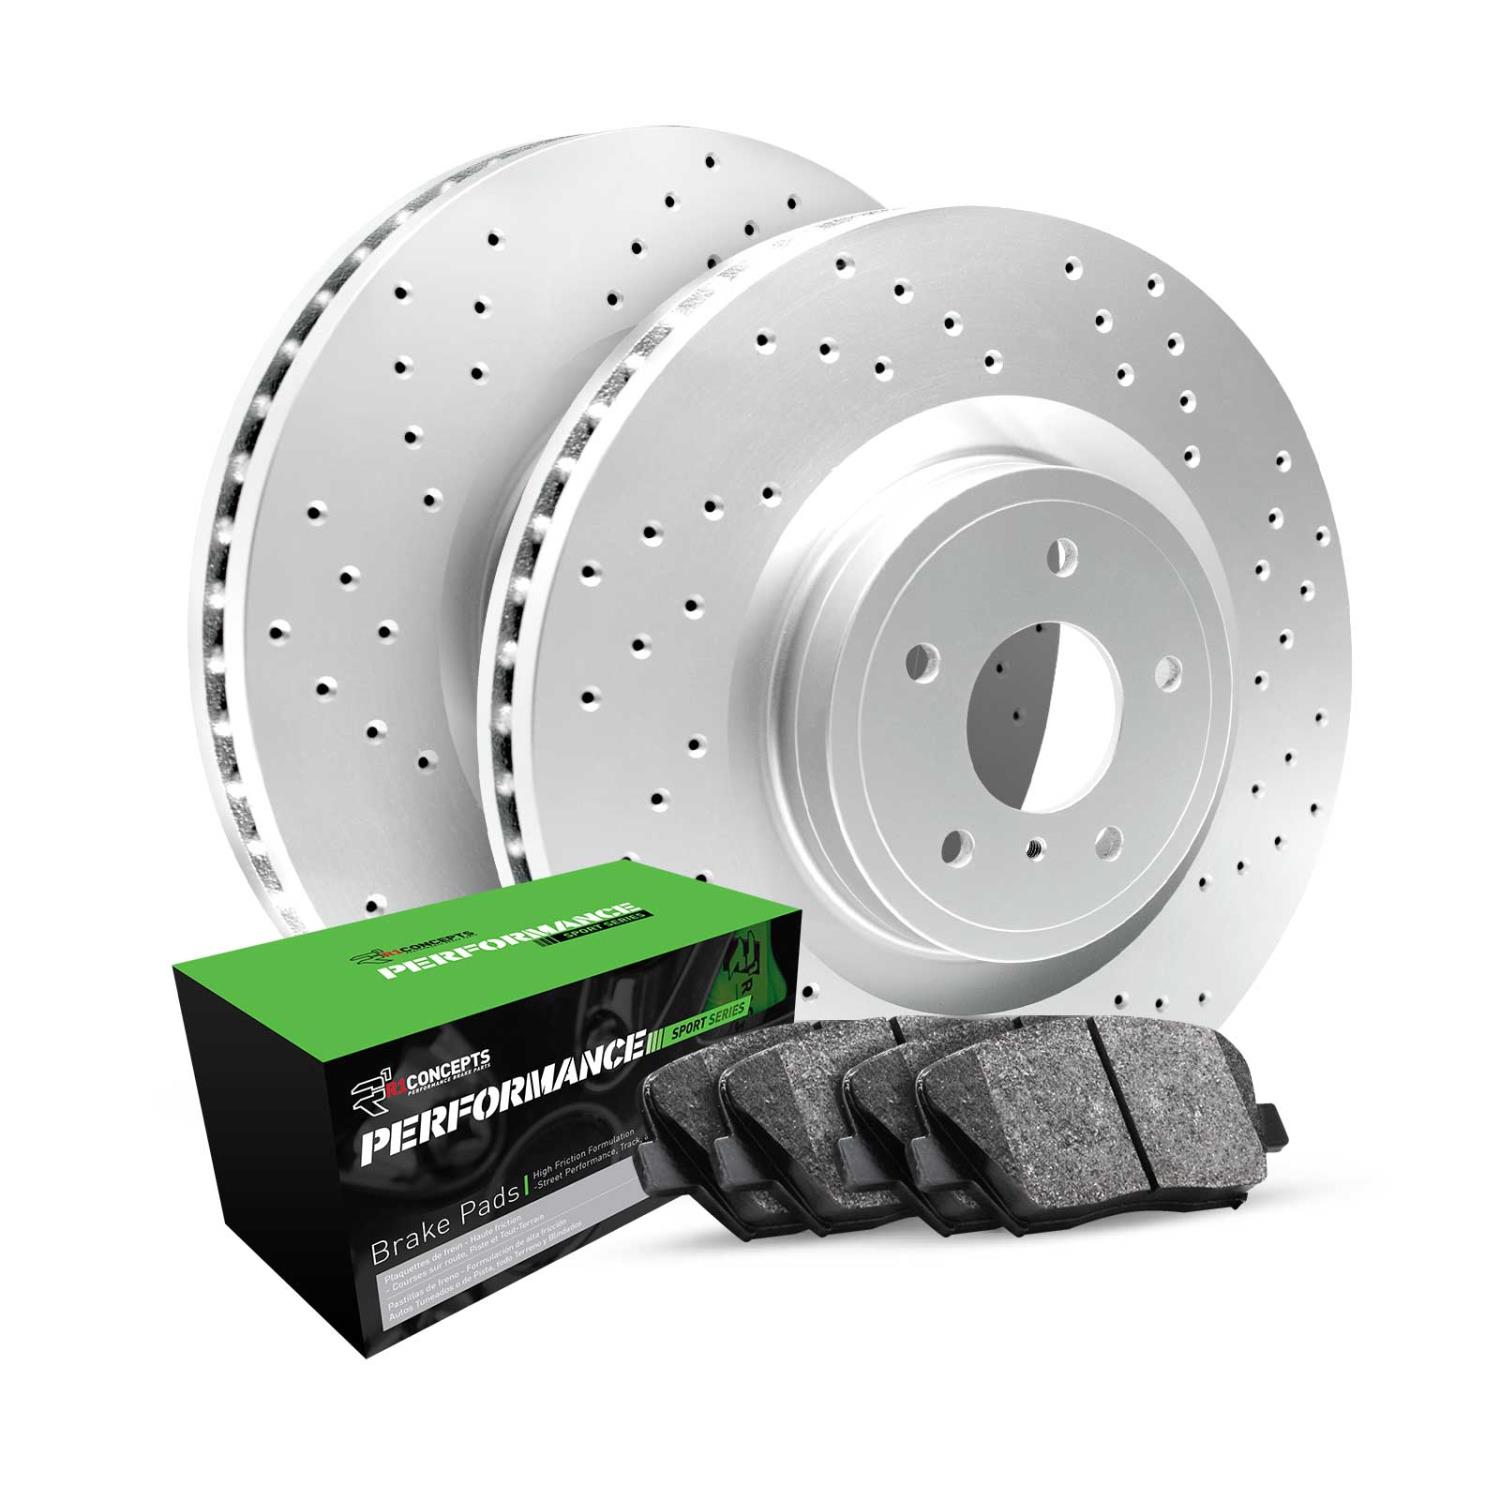 GEO-Carbon Drilled Brake Rotor Set w/Performance Sport Pads, Fits Select Fits Multiple Makes/Models, Position: Rear